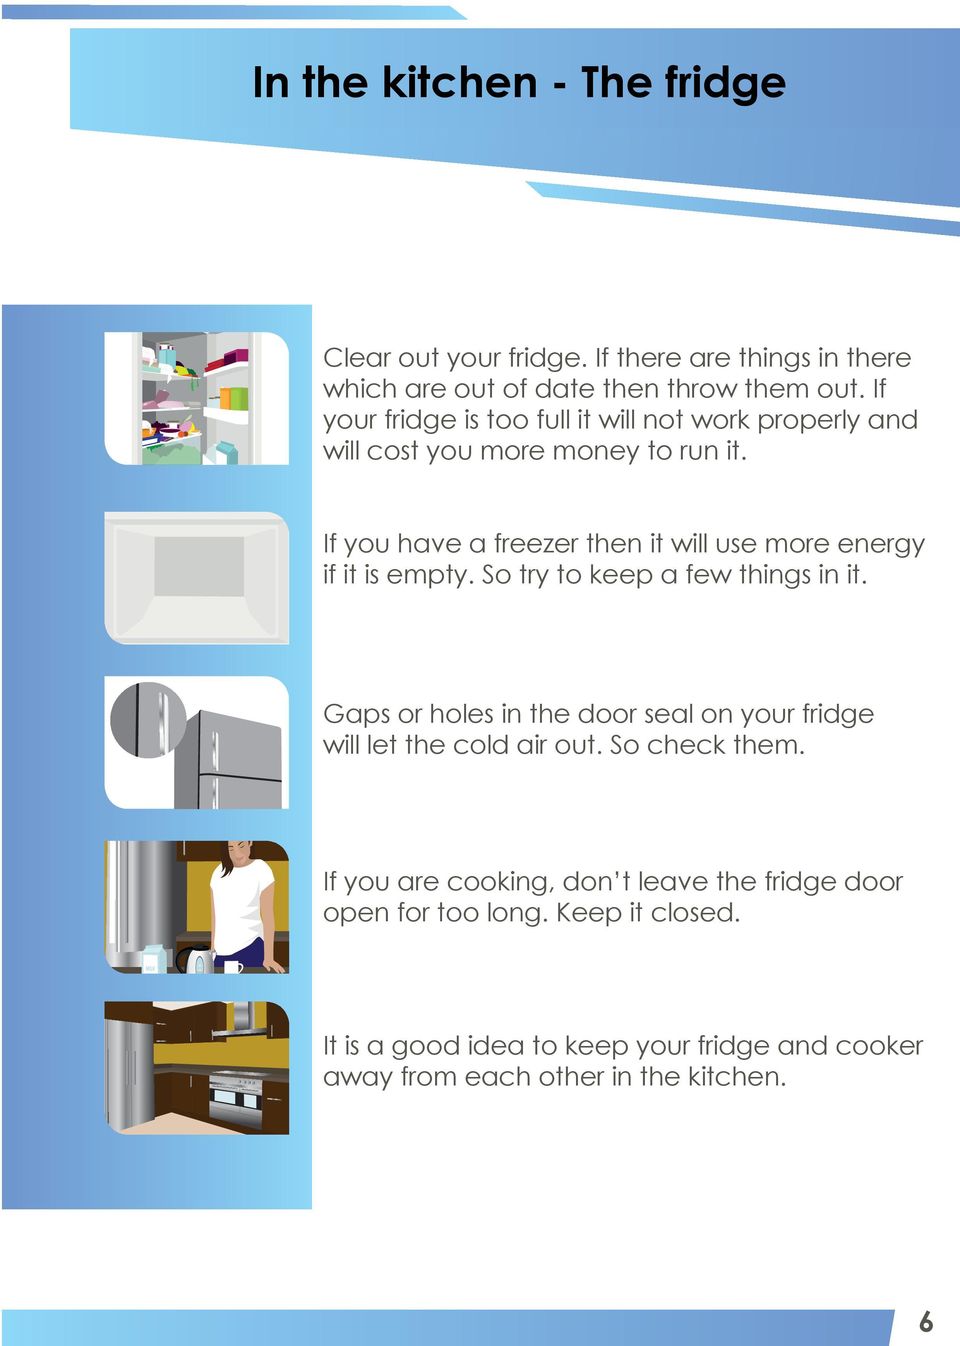 If you have a freezer then it will use more energy if it is empty. So try to keep a few things in it.